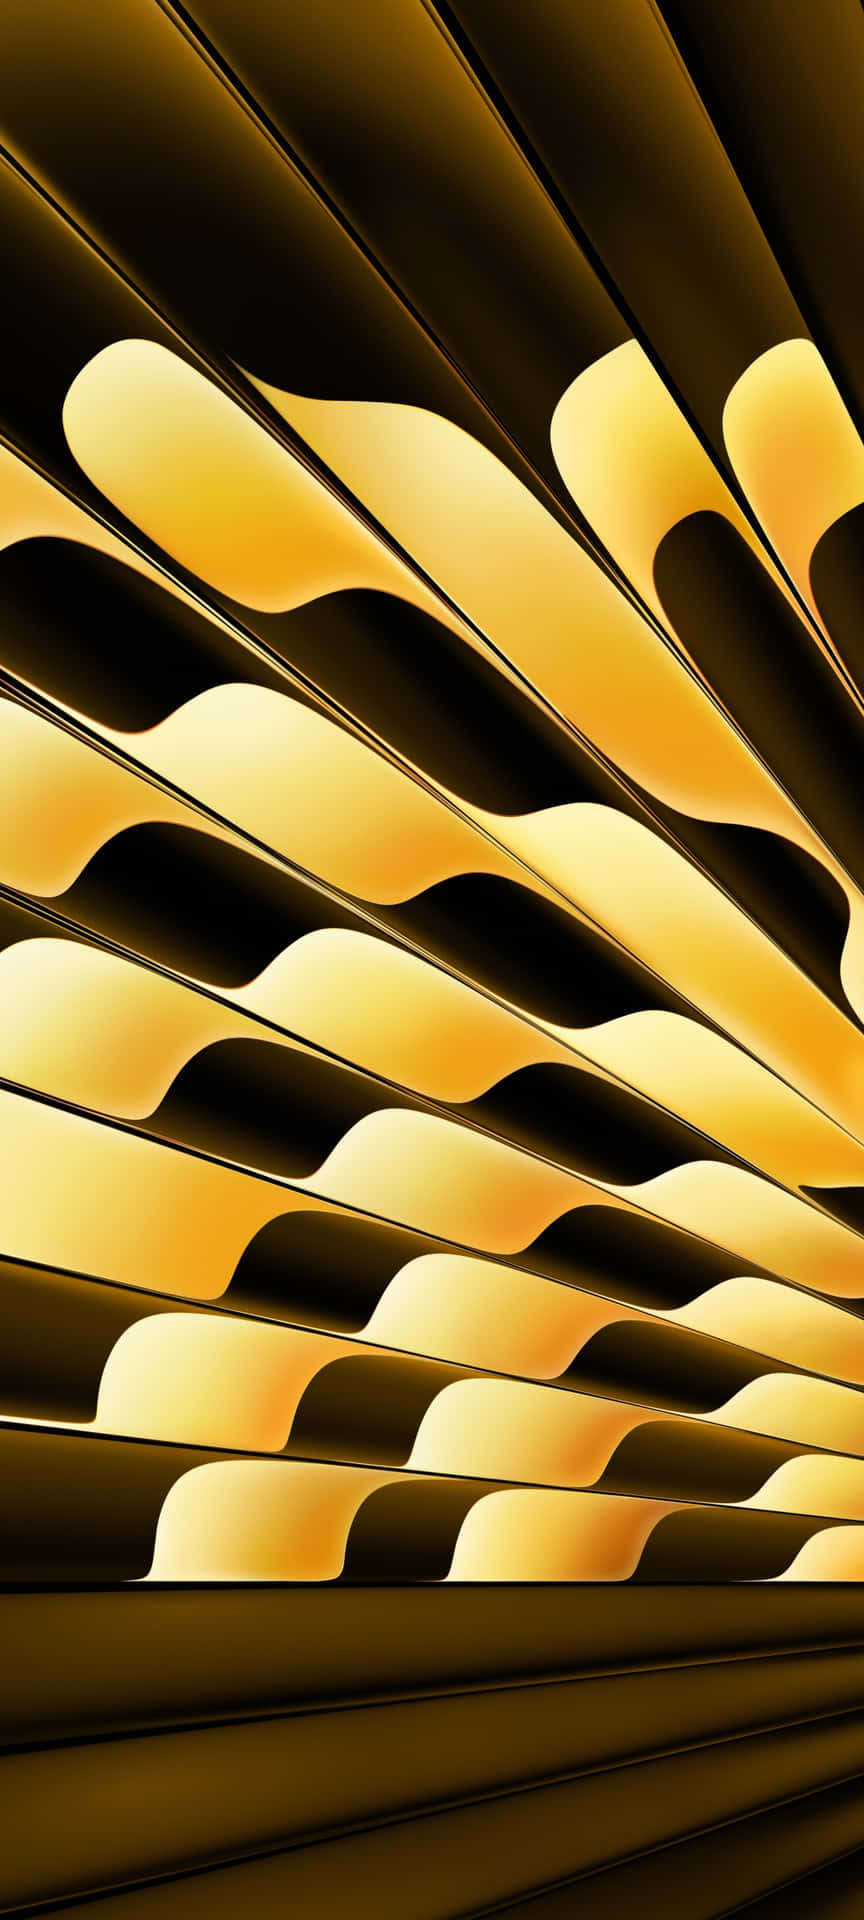 Abstract Golden Waves Background Wallpaper